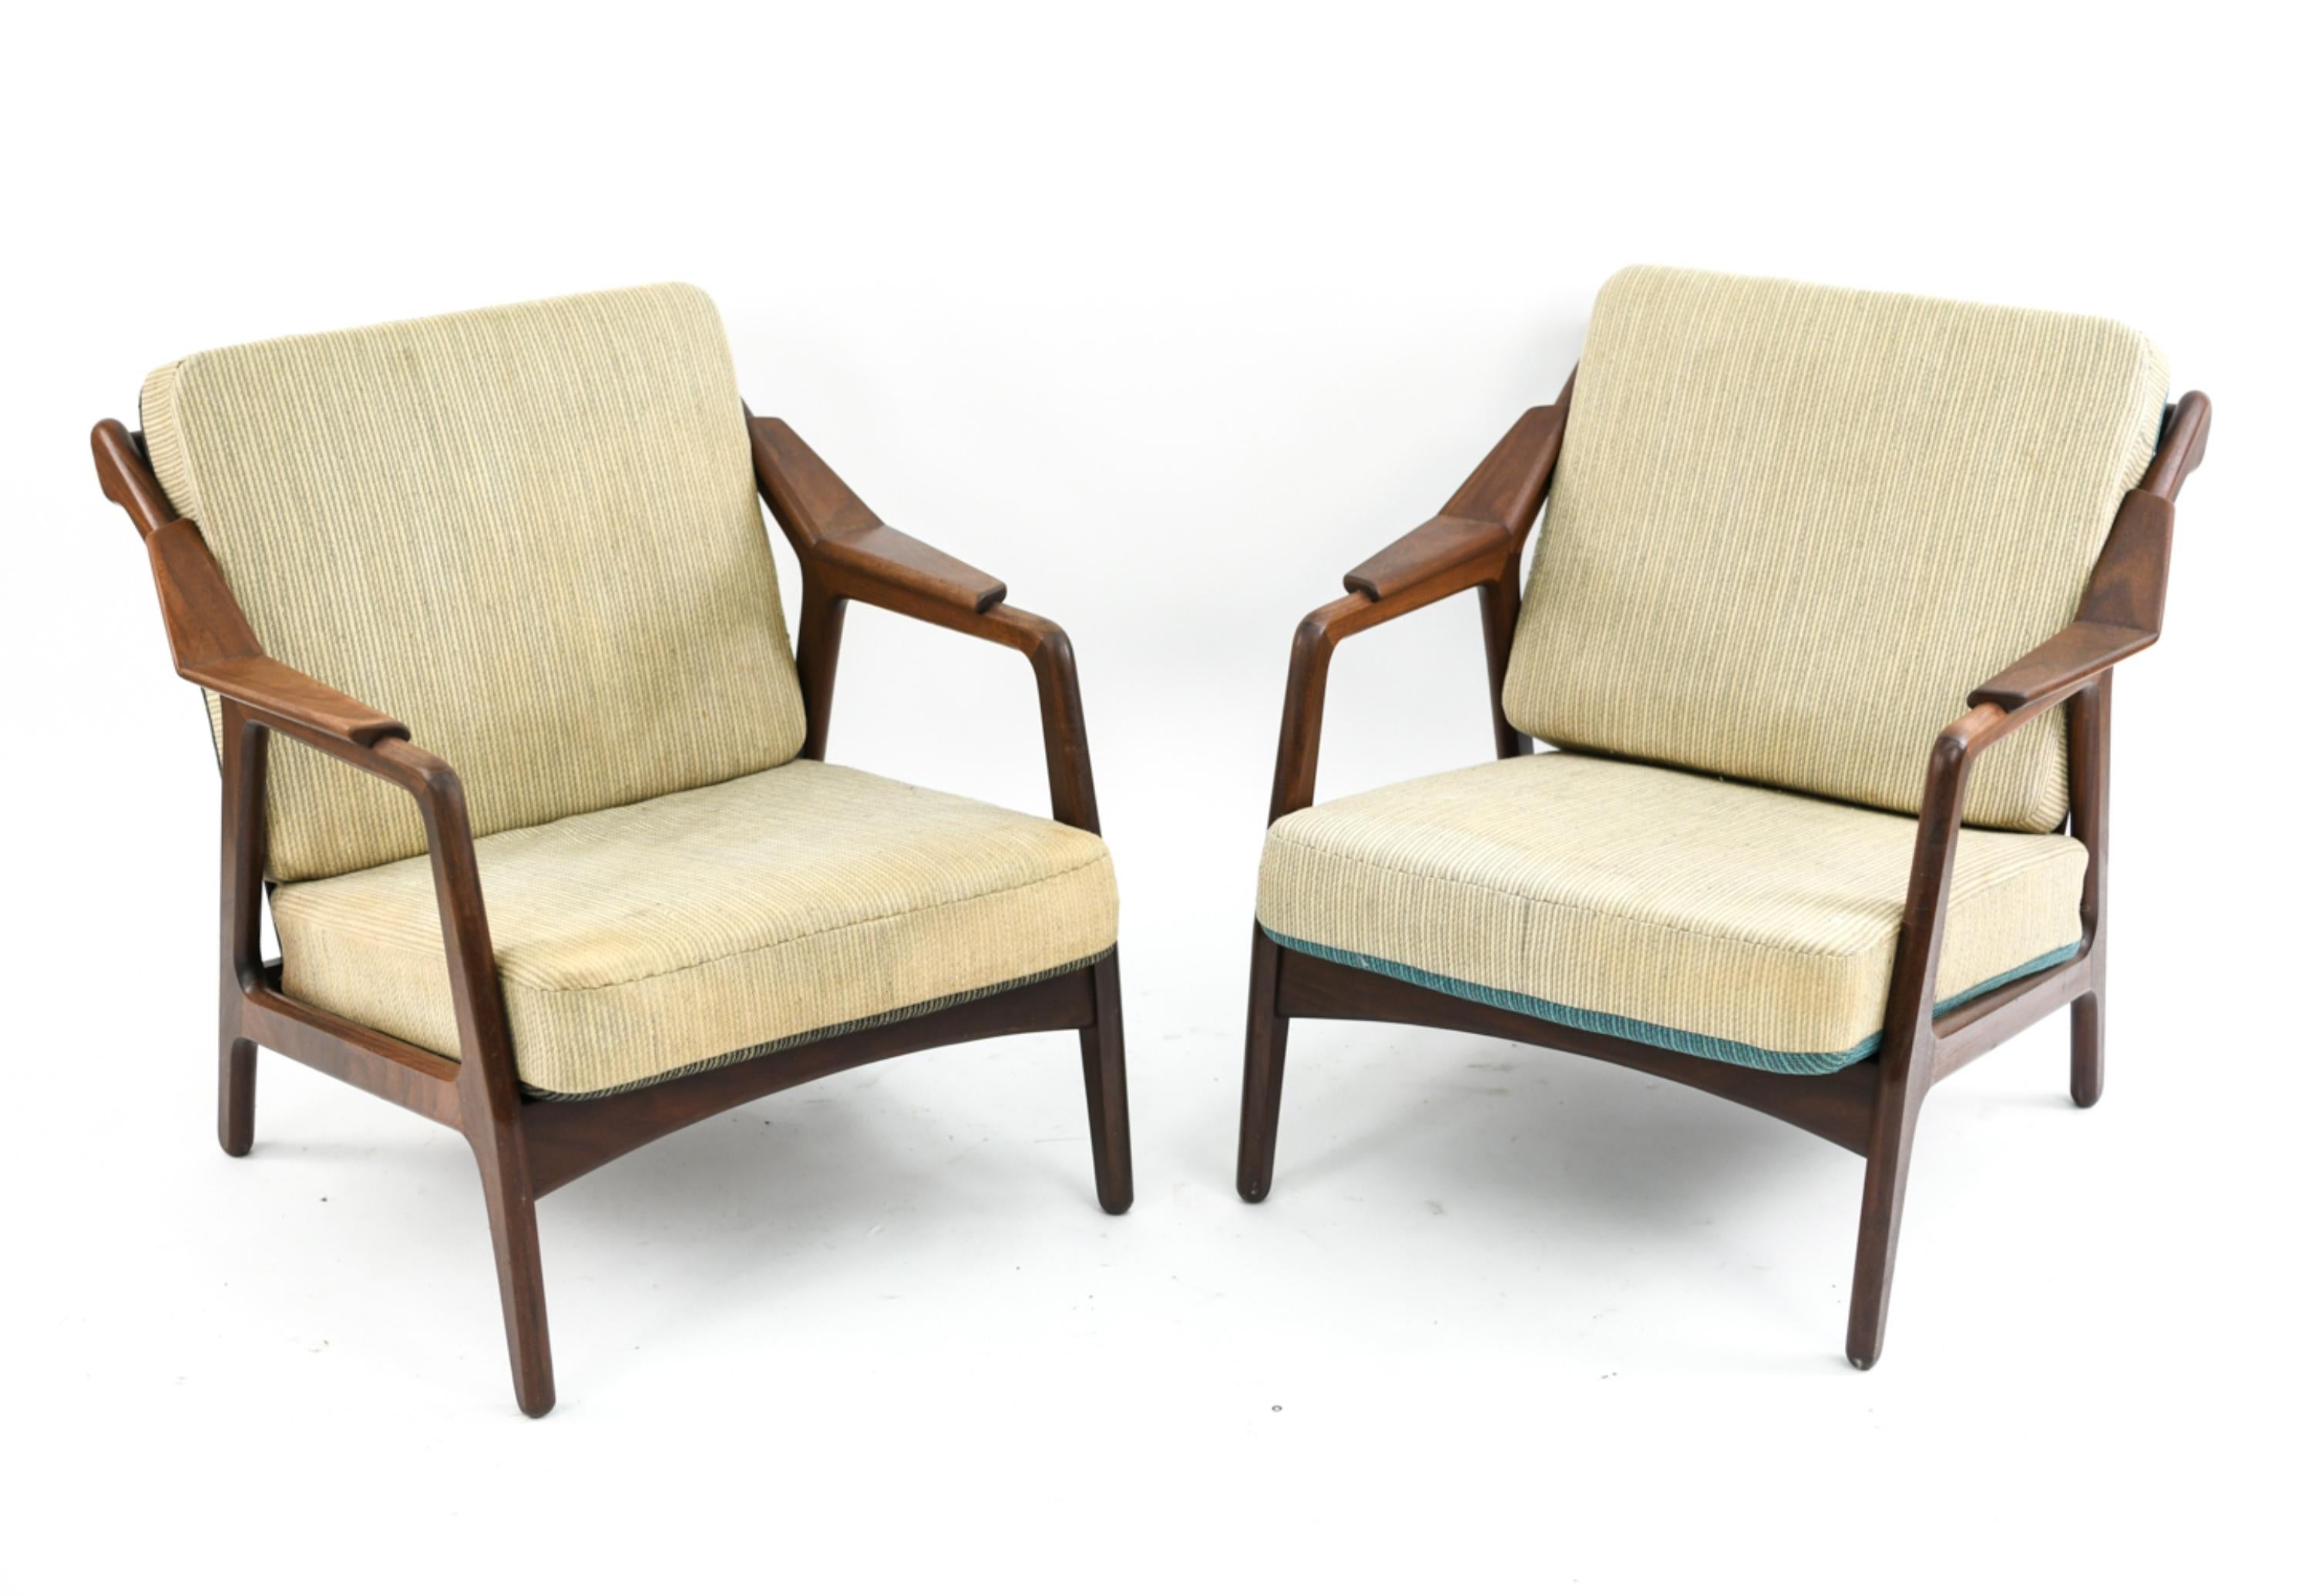 This is a fabulous pair of lounge chairs designed by H. Brockmann-Petersen, circa 1950s. This design is a highly sought after example of Scandinavian Modern style and features attractively angular wooden frames.